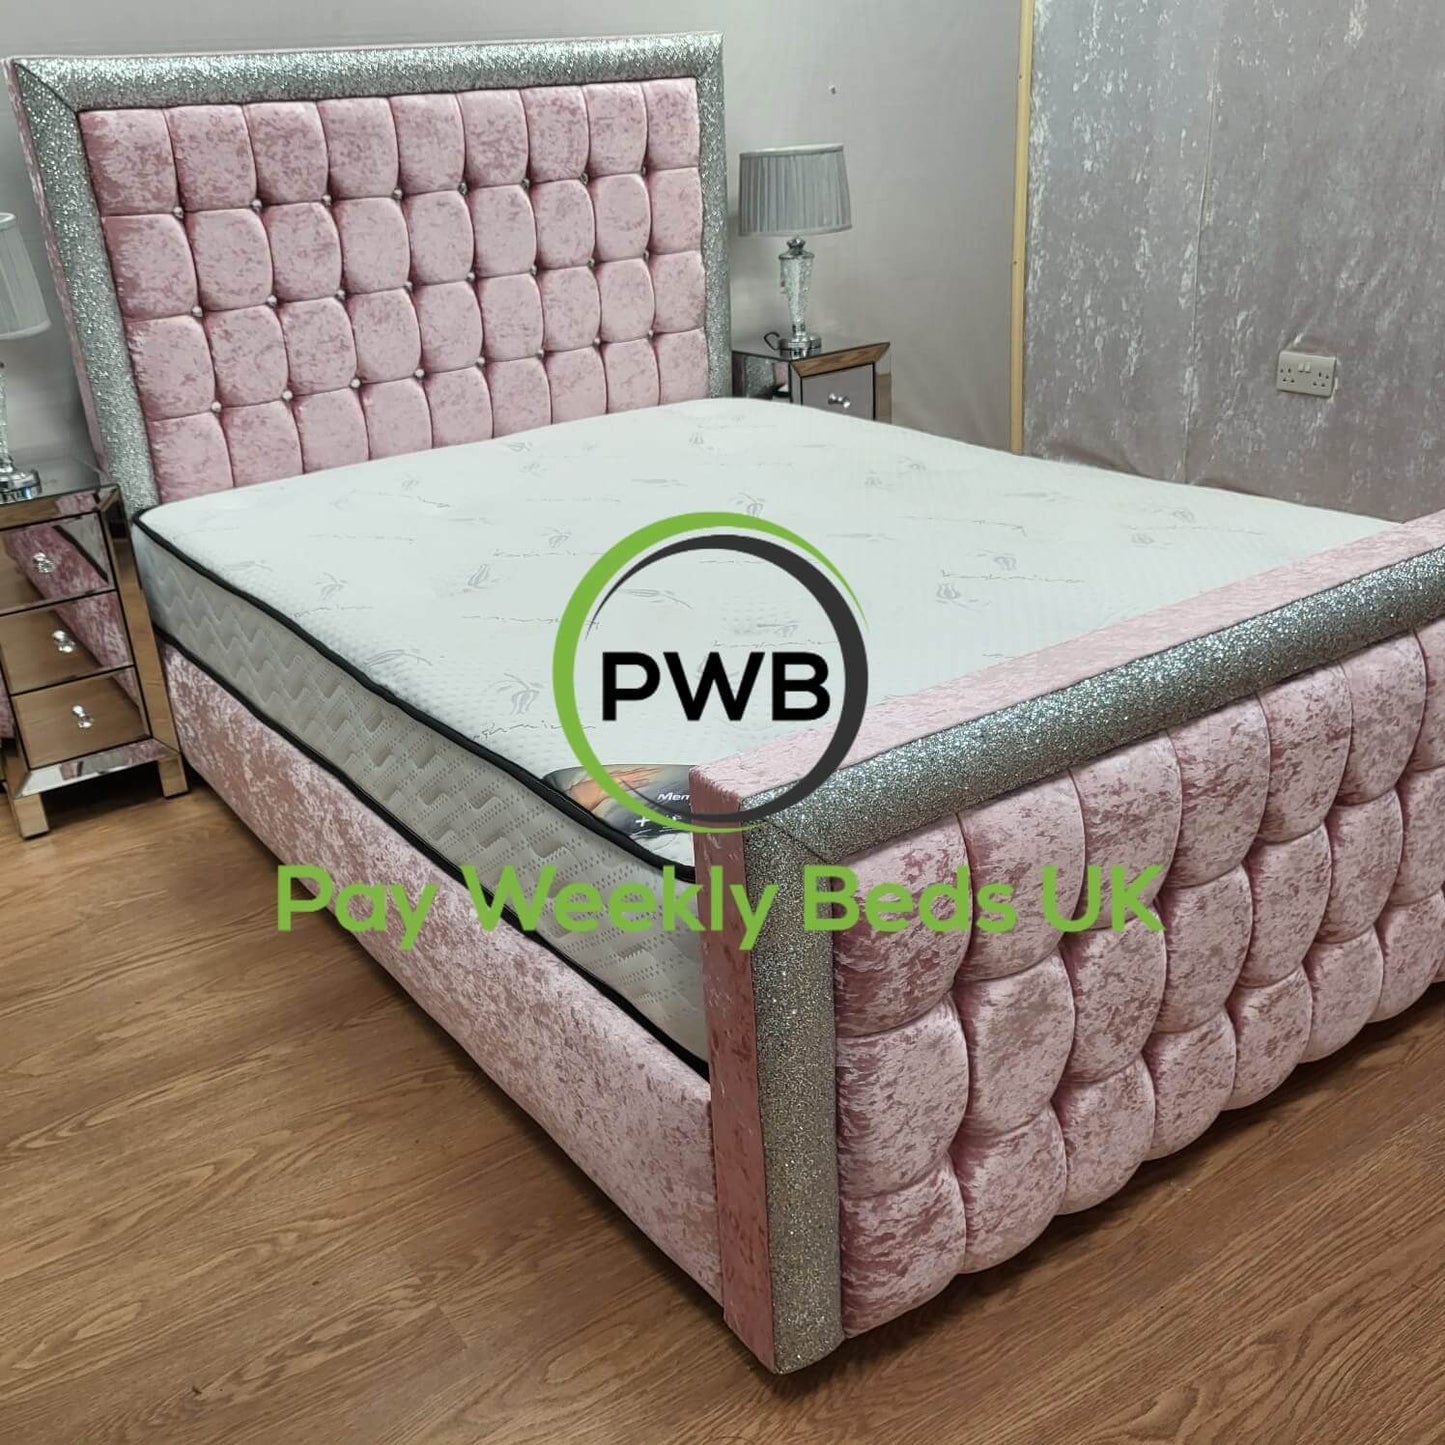 Glitter bed and mattress set - Pay Weekly Beds UK